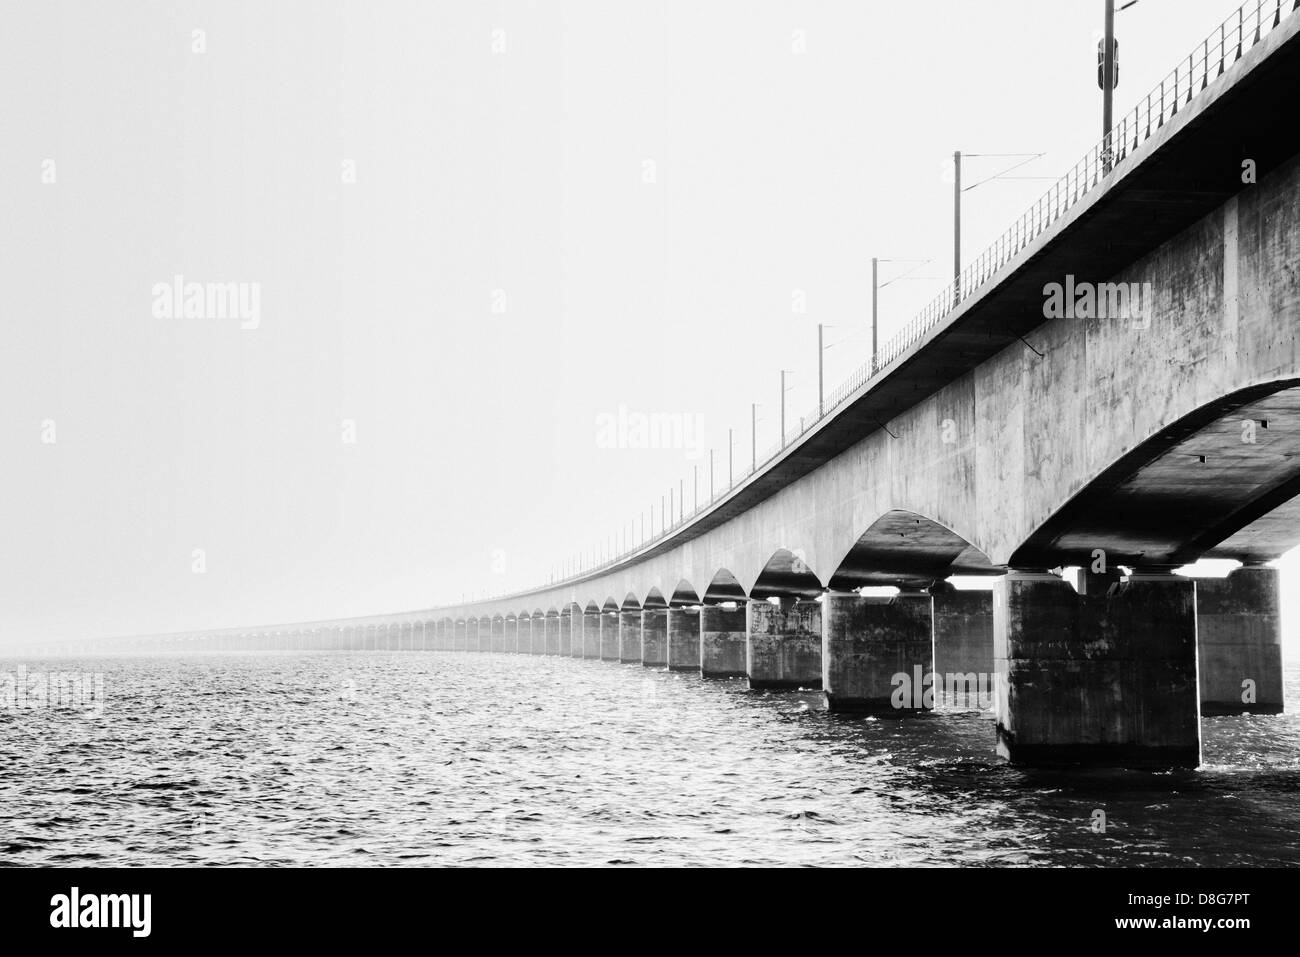 Black and white image of the landmark bridge curving over the water and disappearing into the coastal fog at Nyborg, Denmark Stock Photo